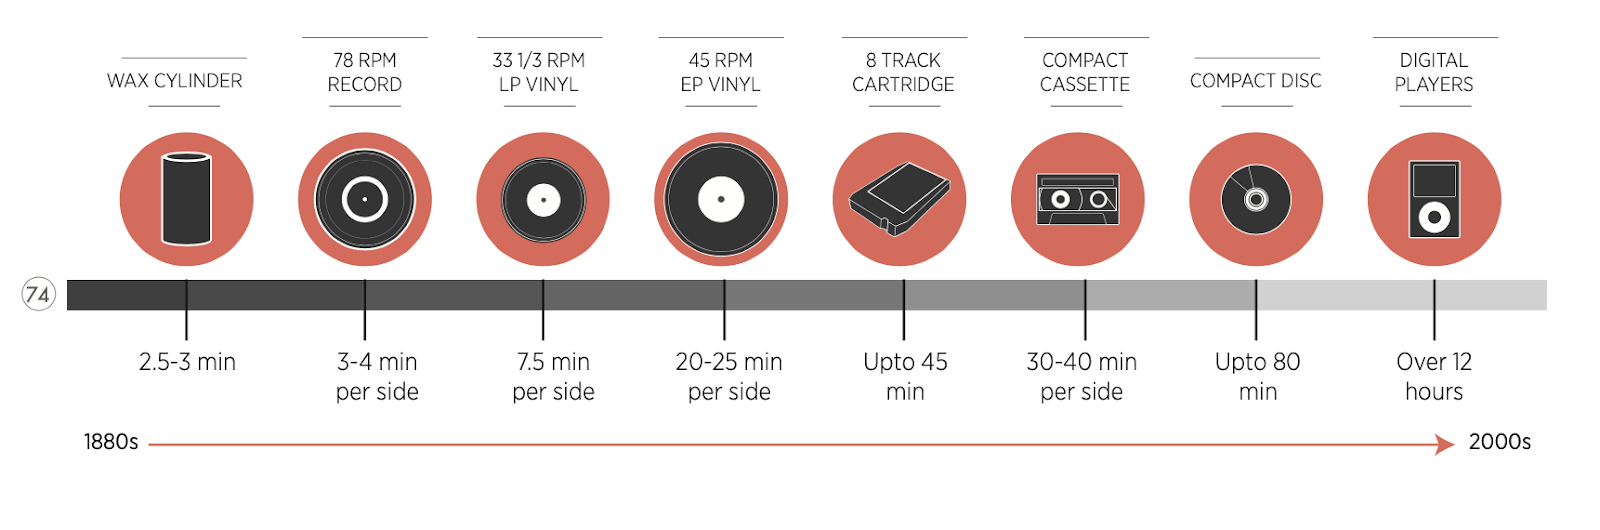 <p>Illustration of the <em>evolving</em> capacities of music storage media over the years.</p>